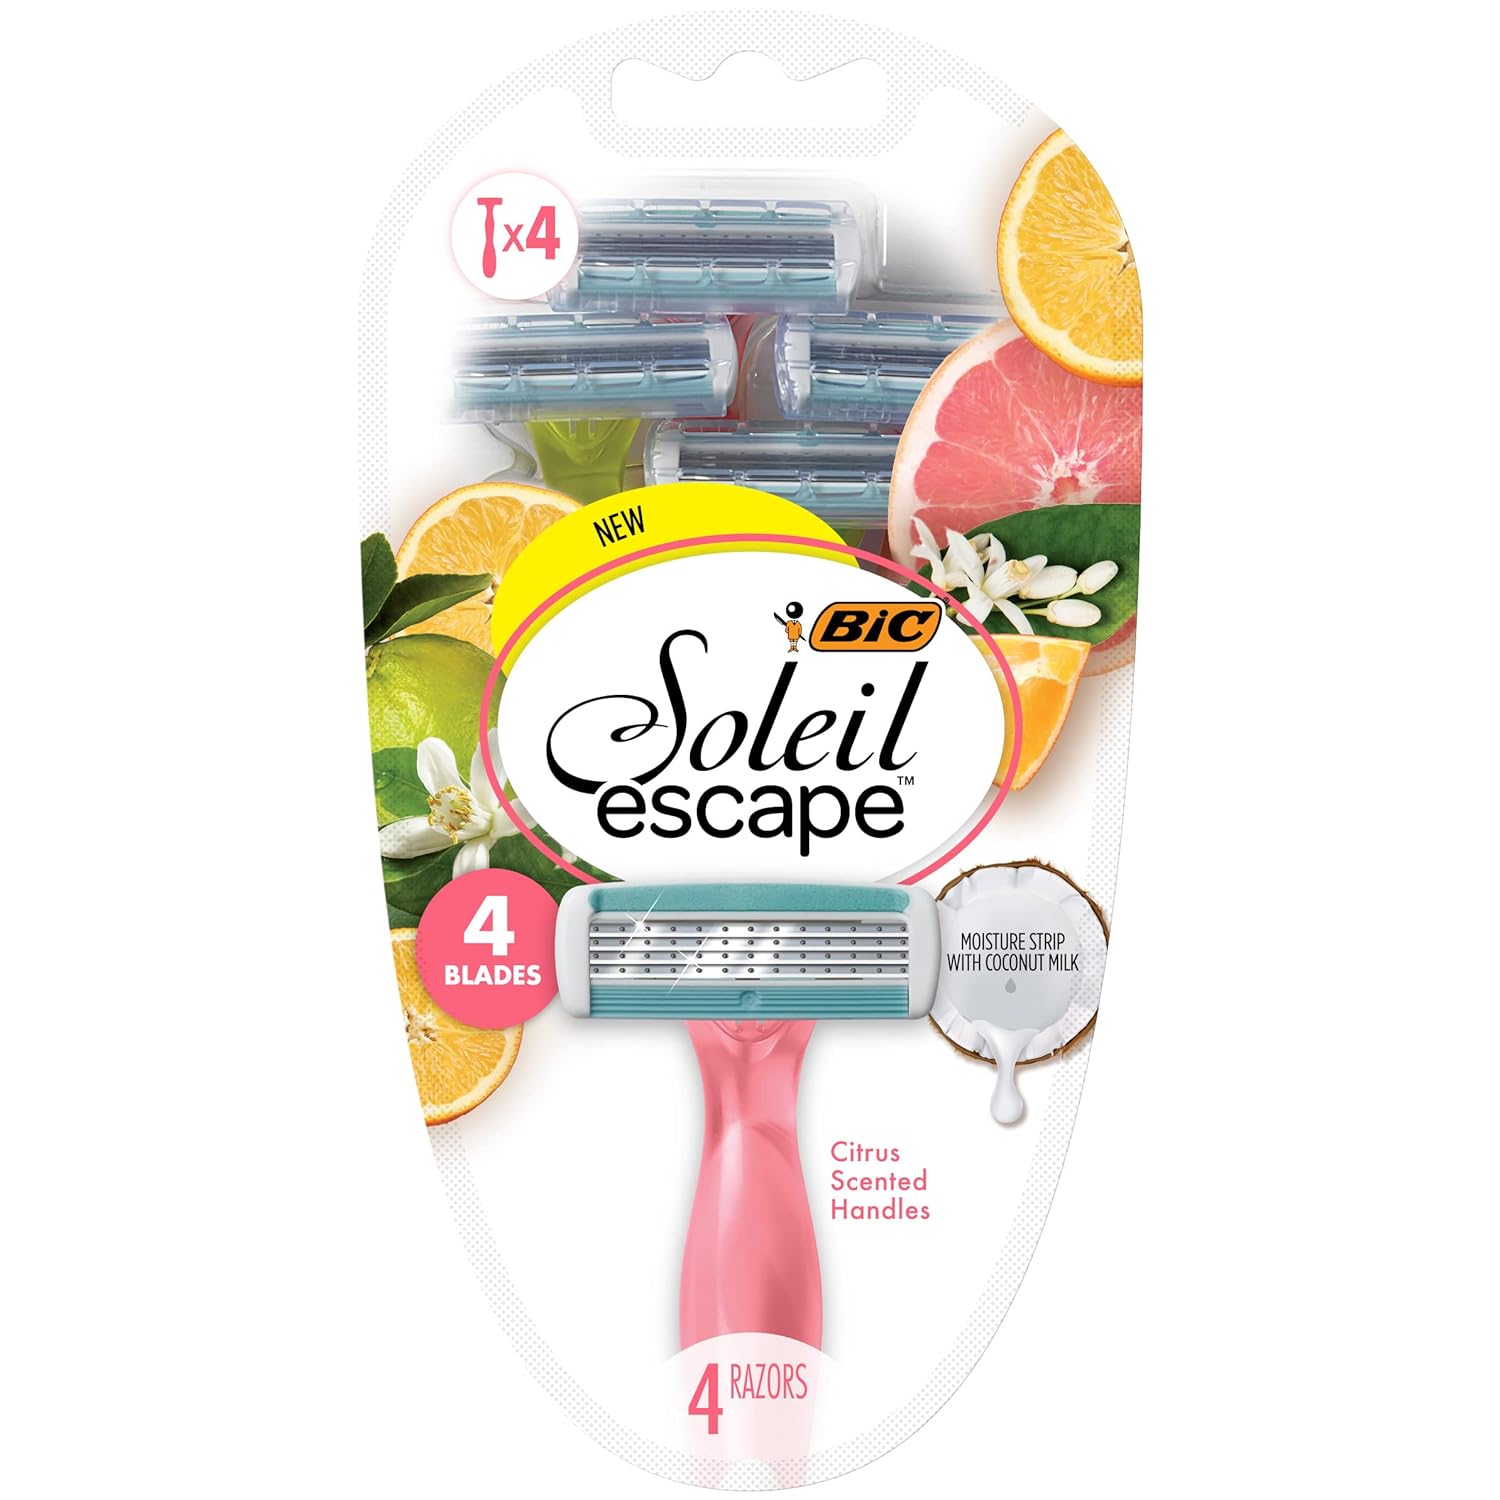 BIC Soleil Escape Women' Disposable Razors With 4 Blades for a Sensorial Experience and Comfortable Shave, Pack of Citrus Scented Handle Shaving Razors for Women, 4 Count